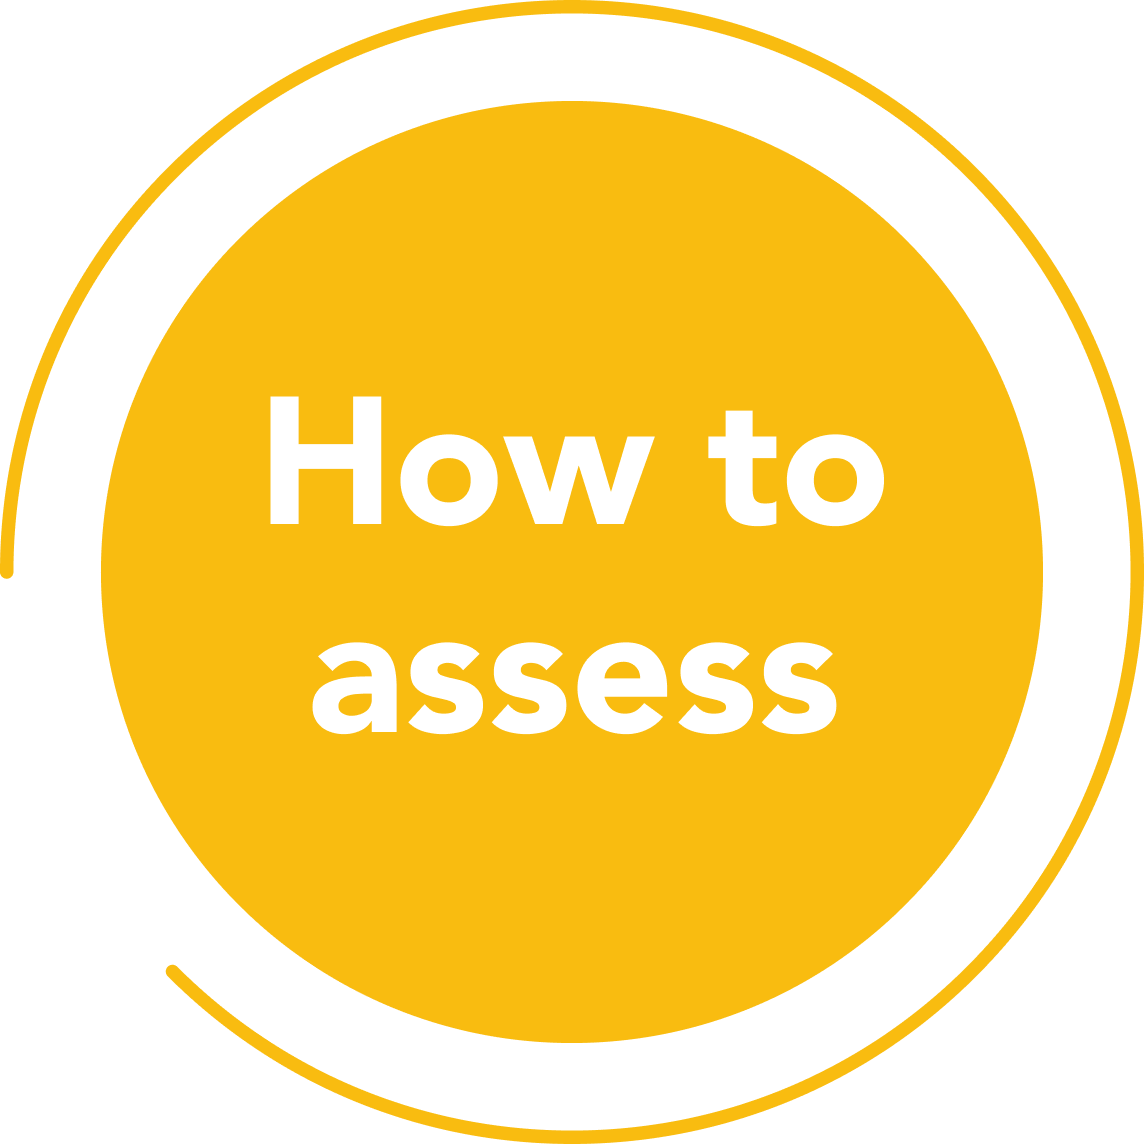 How to assess